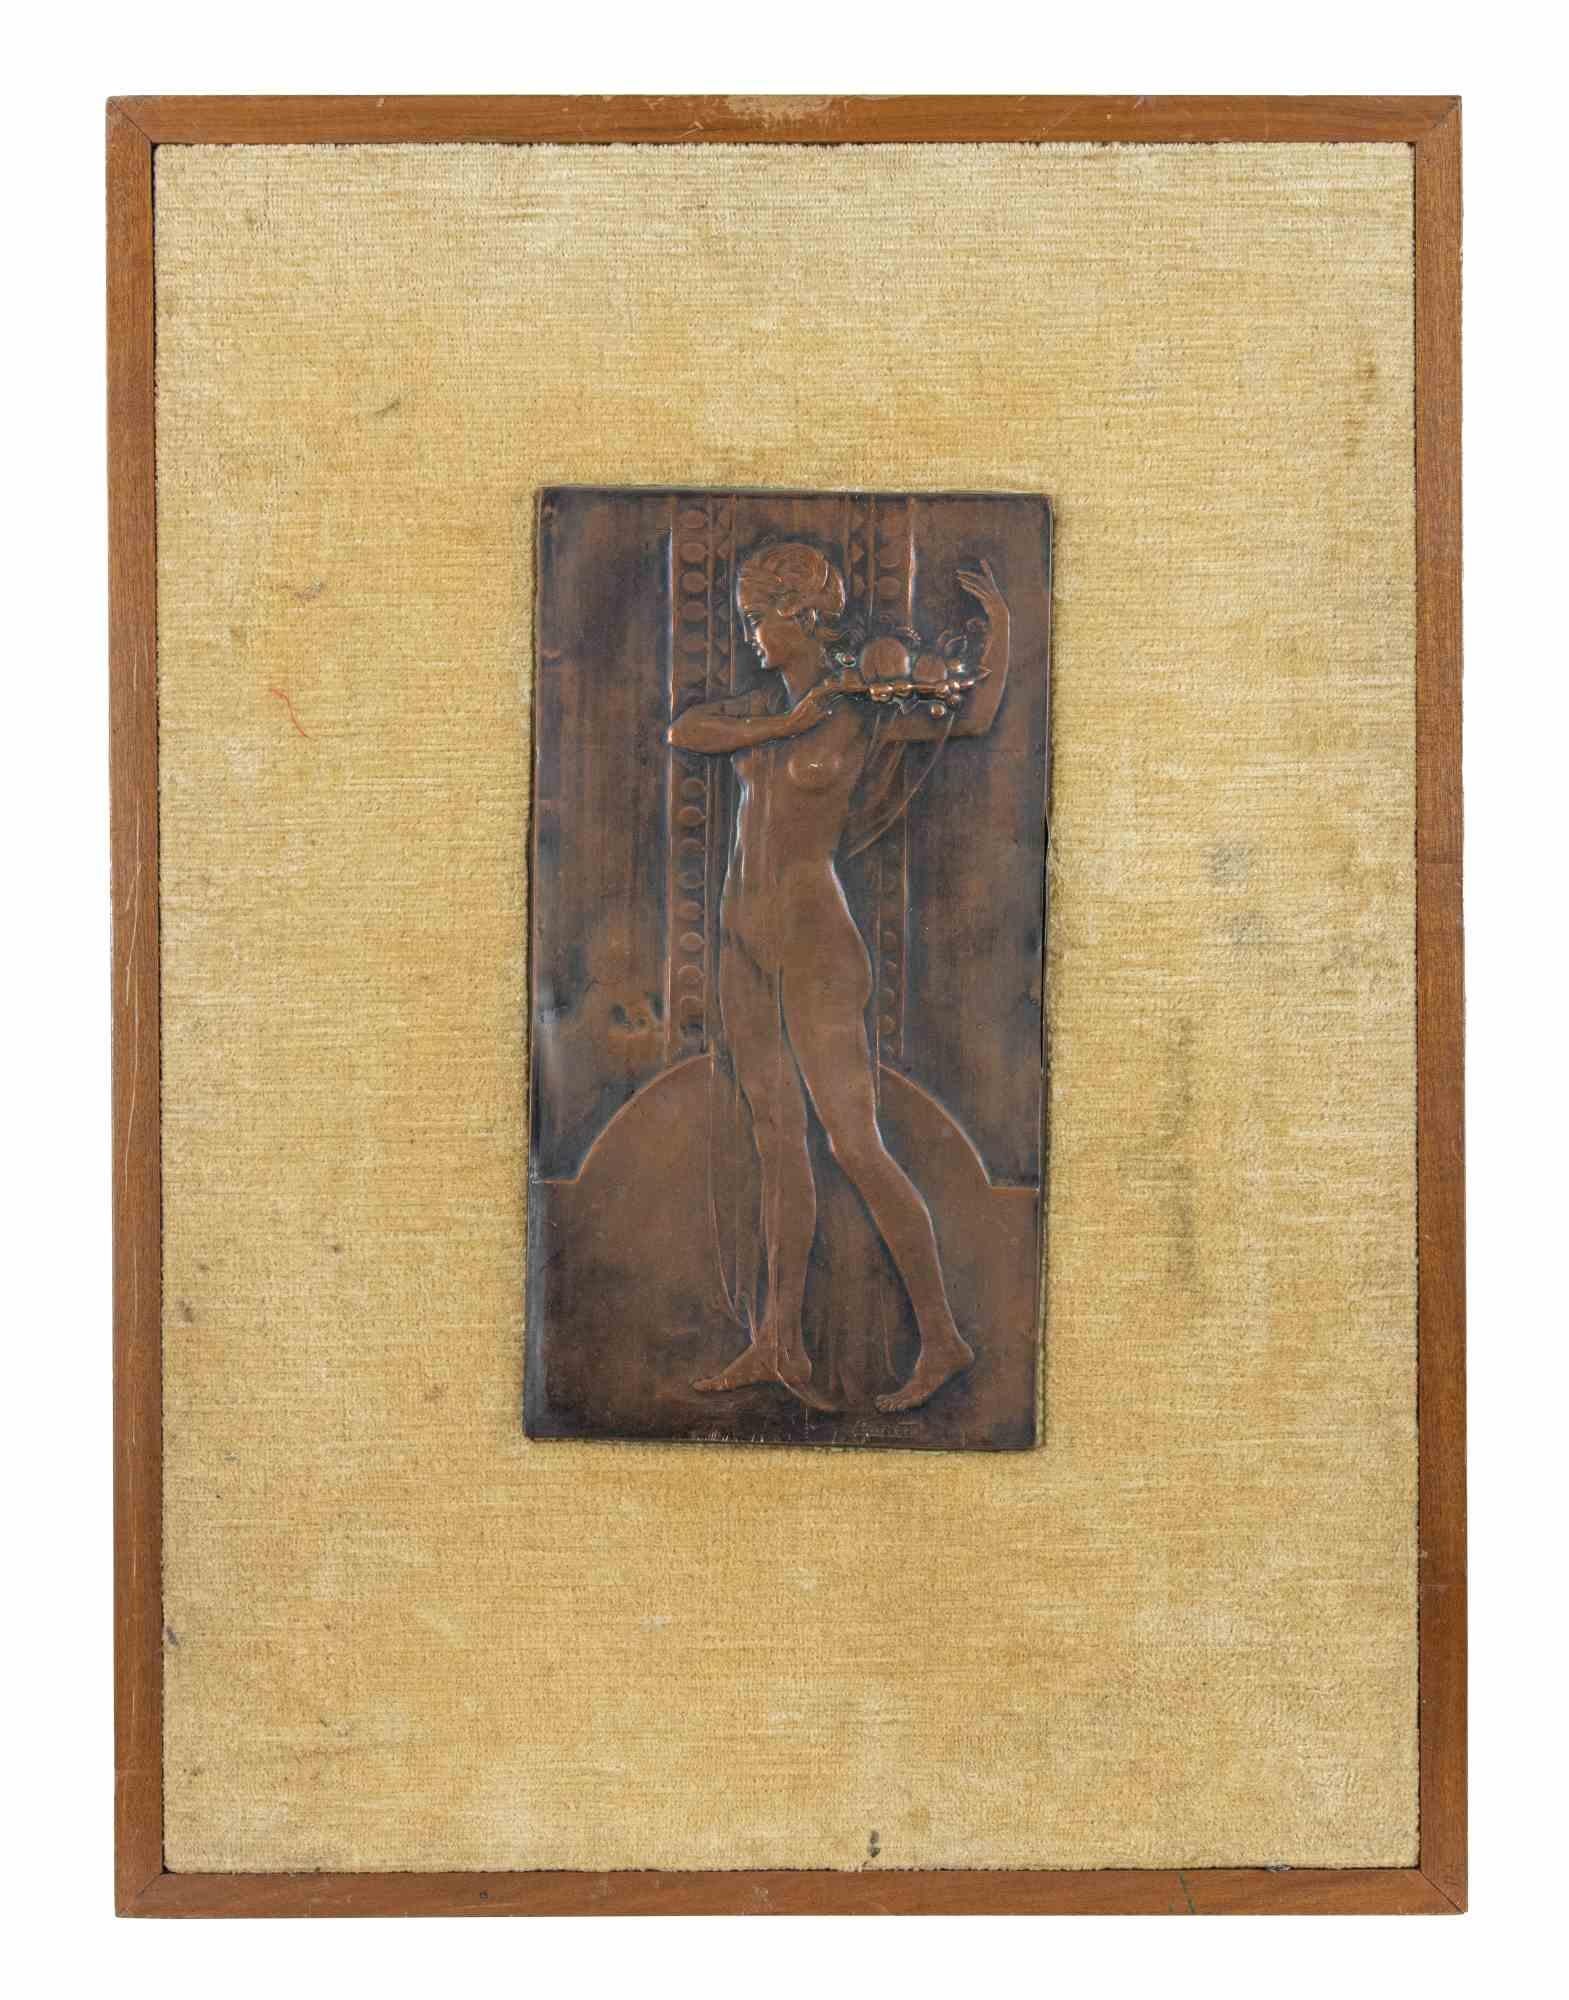 Ancient Woman - Copper Plate Engraved - Early 20th Century - Mixed Media Art by Unknown